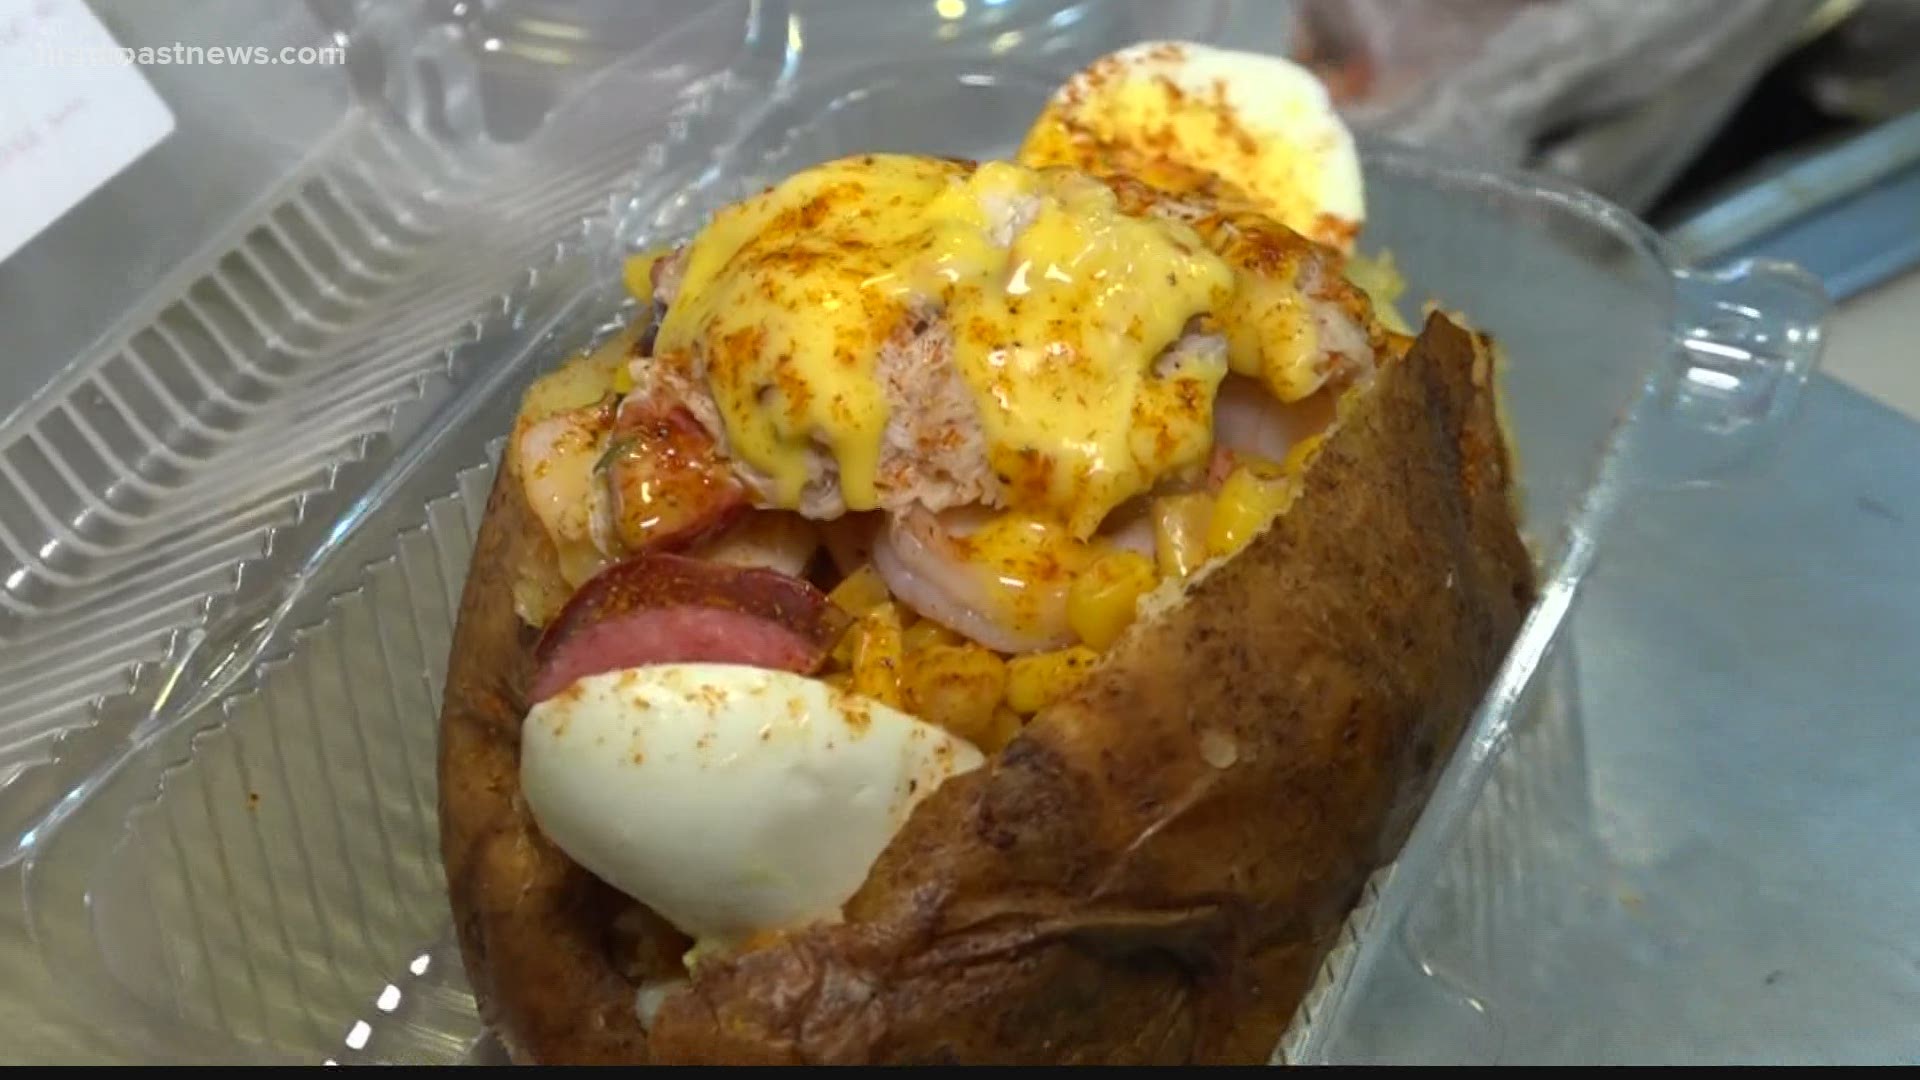 Crab, shrimp and Old Bay seasoning. It's not a low-county boil, it's just some of the items featured in the 'Crab Pot Potato' at Mr. Potato Spread.